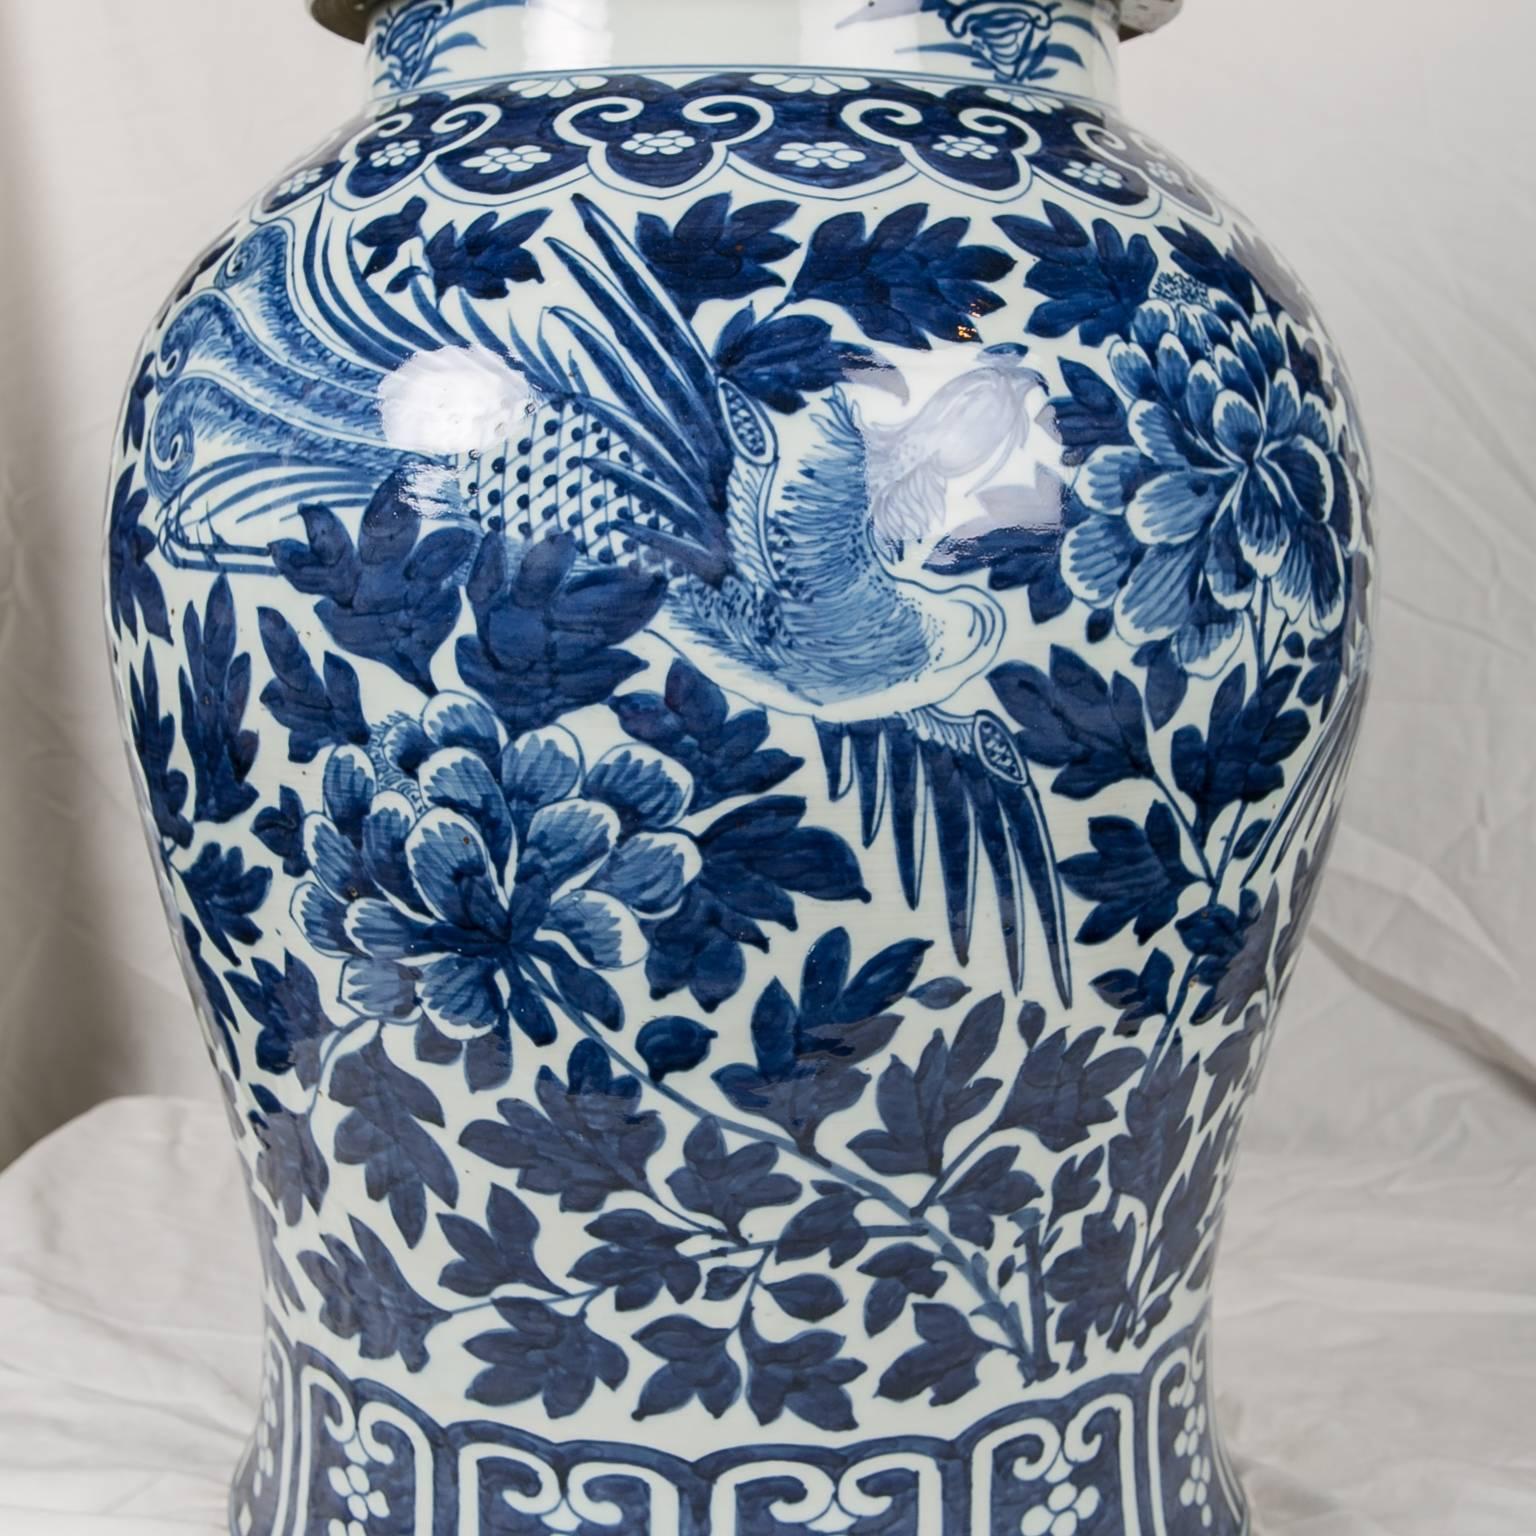 Blue and White Chinese Porcelain Ginger Jars 3